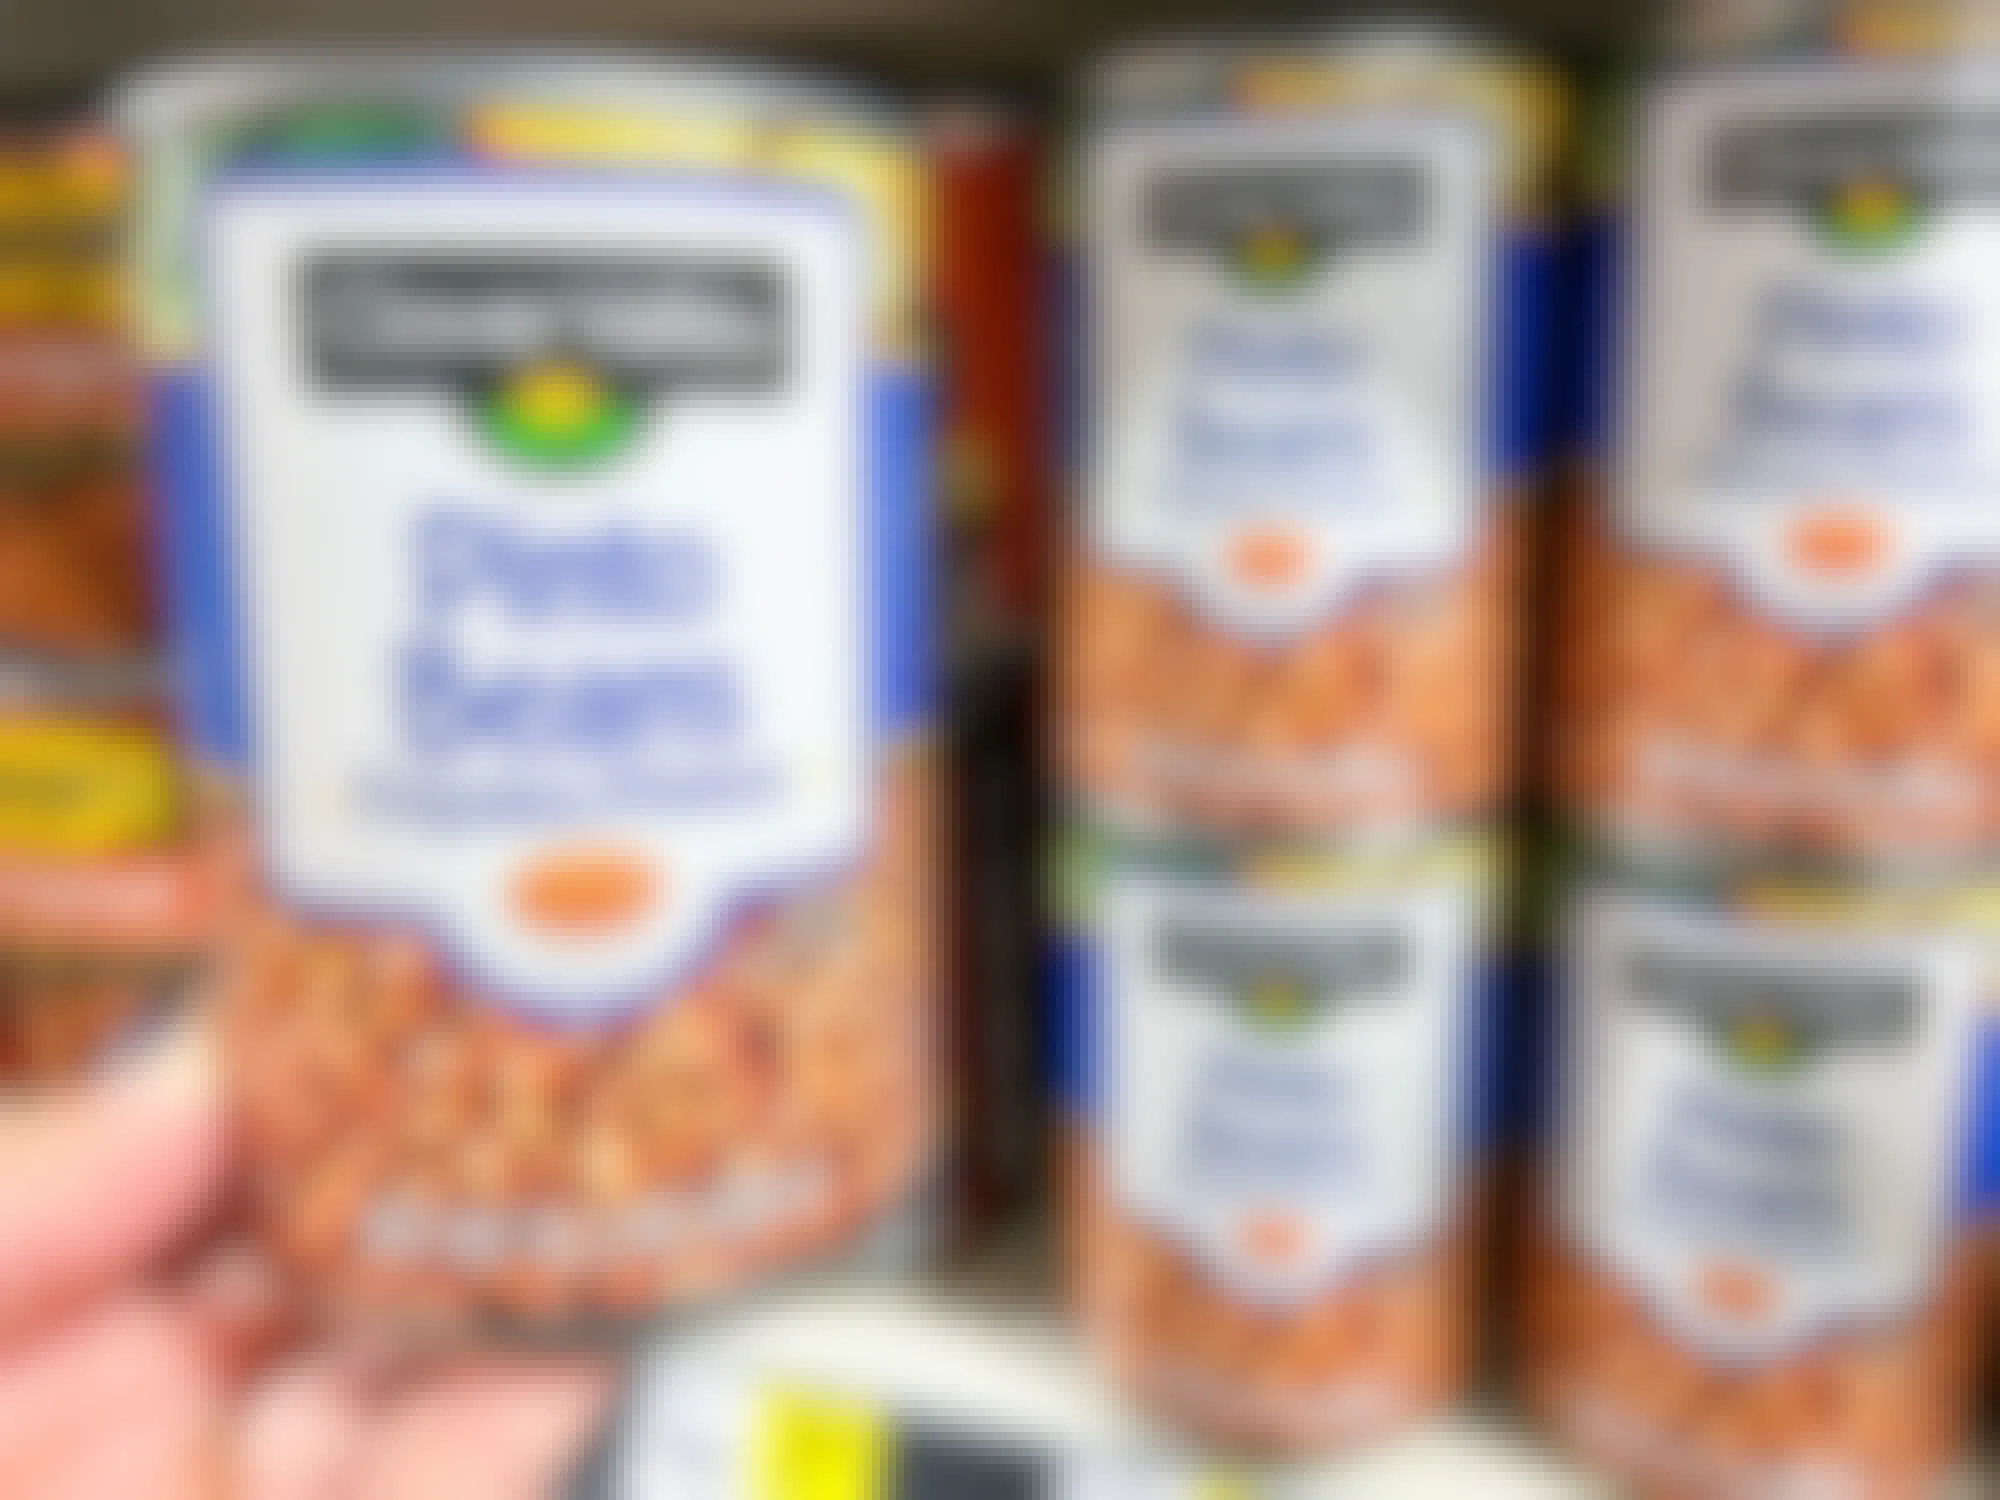 Someone holding a can of Clover Valley pinto beans next to a shelf at Dollar General